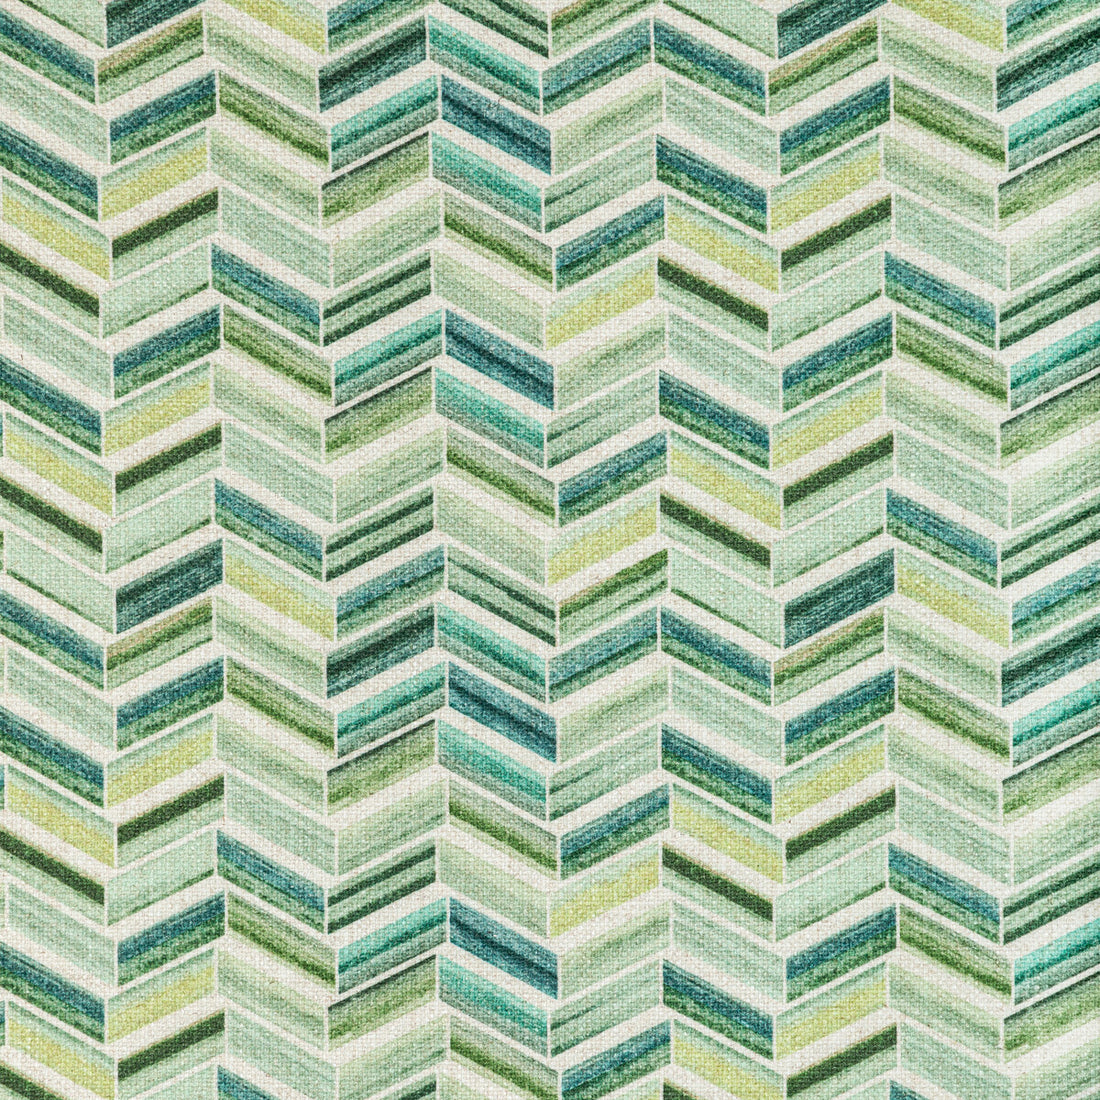 Somersault fabric in mojito color - pattern SOMERSAULT.316.0 - by Kravet Design in the Nadia Watts Gem collection